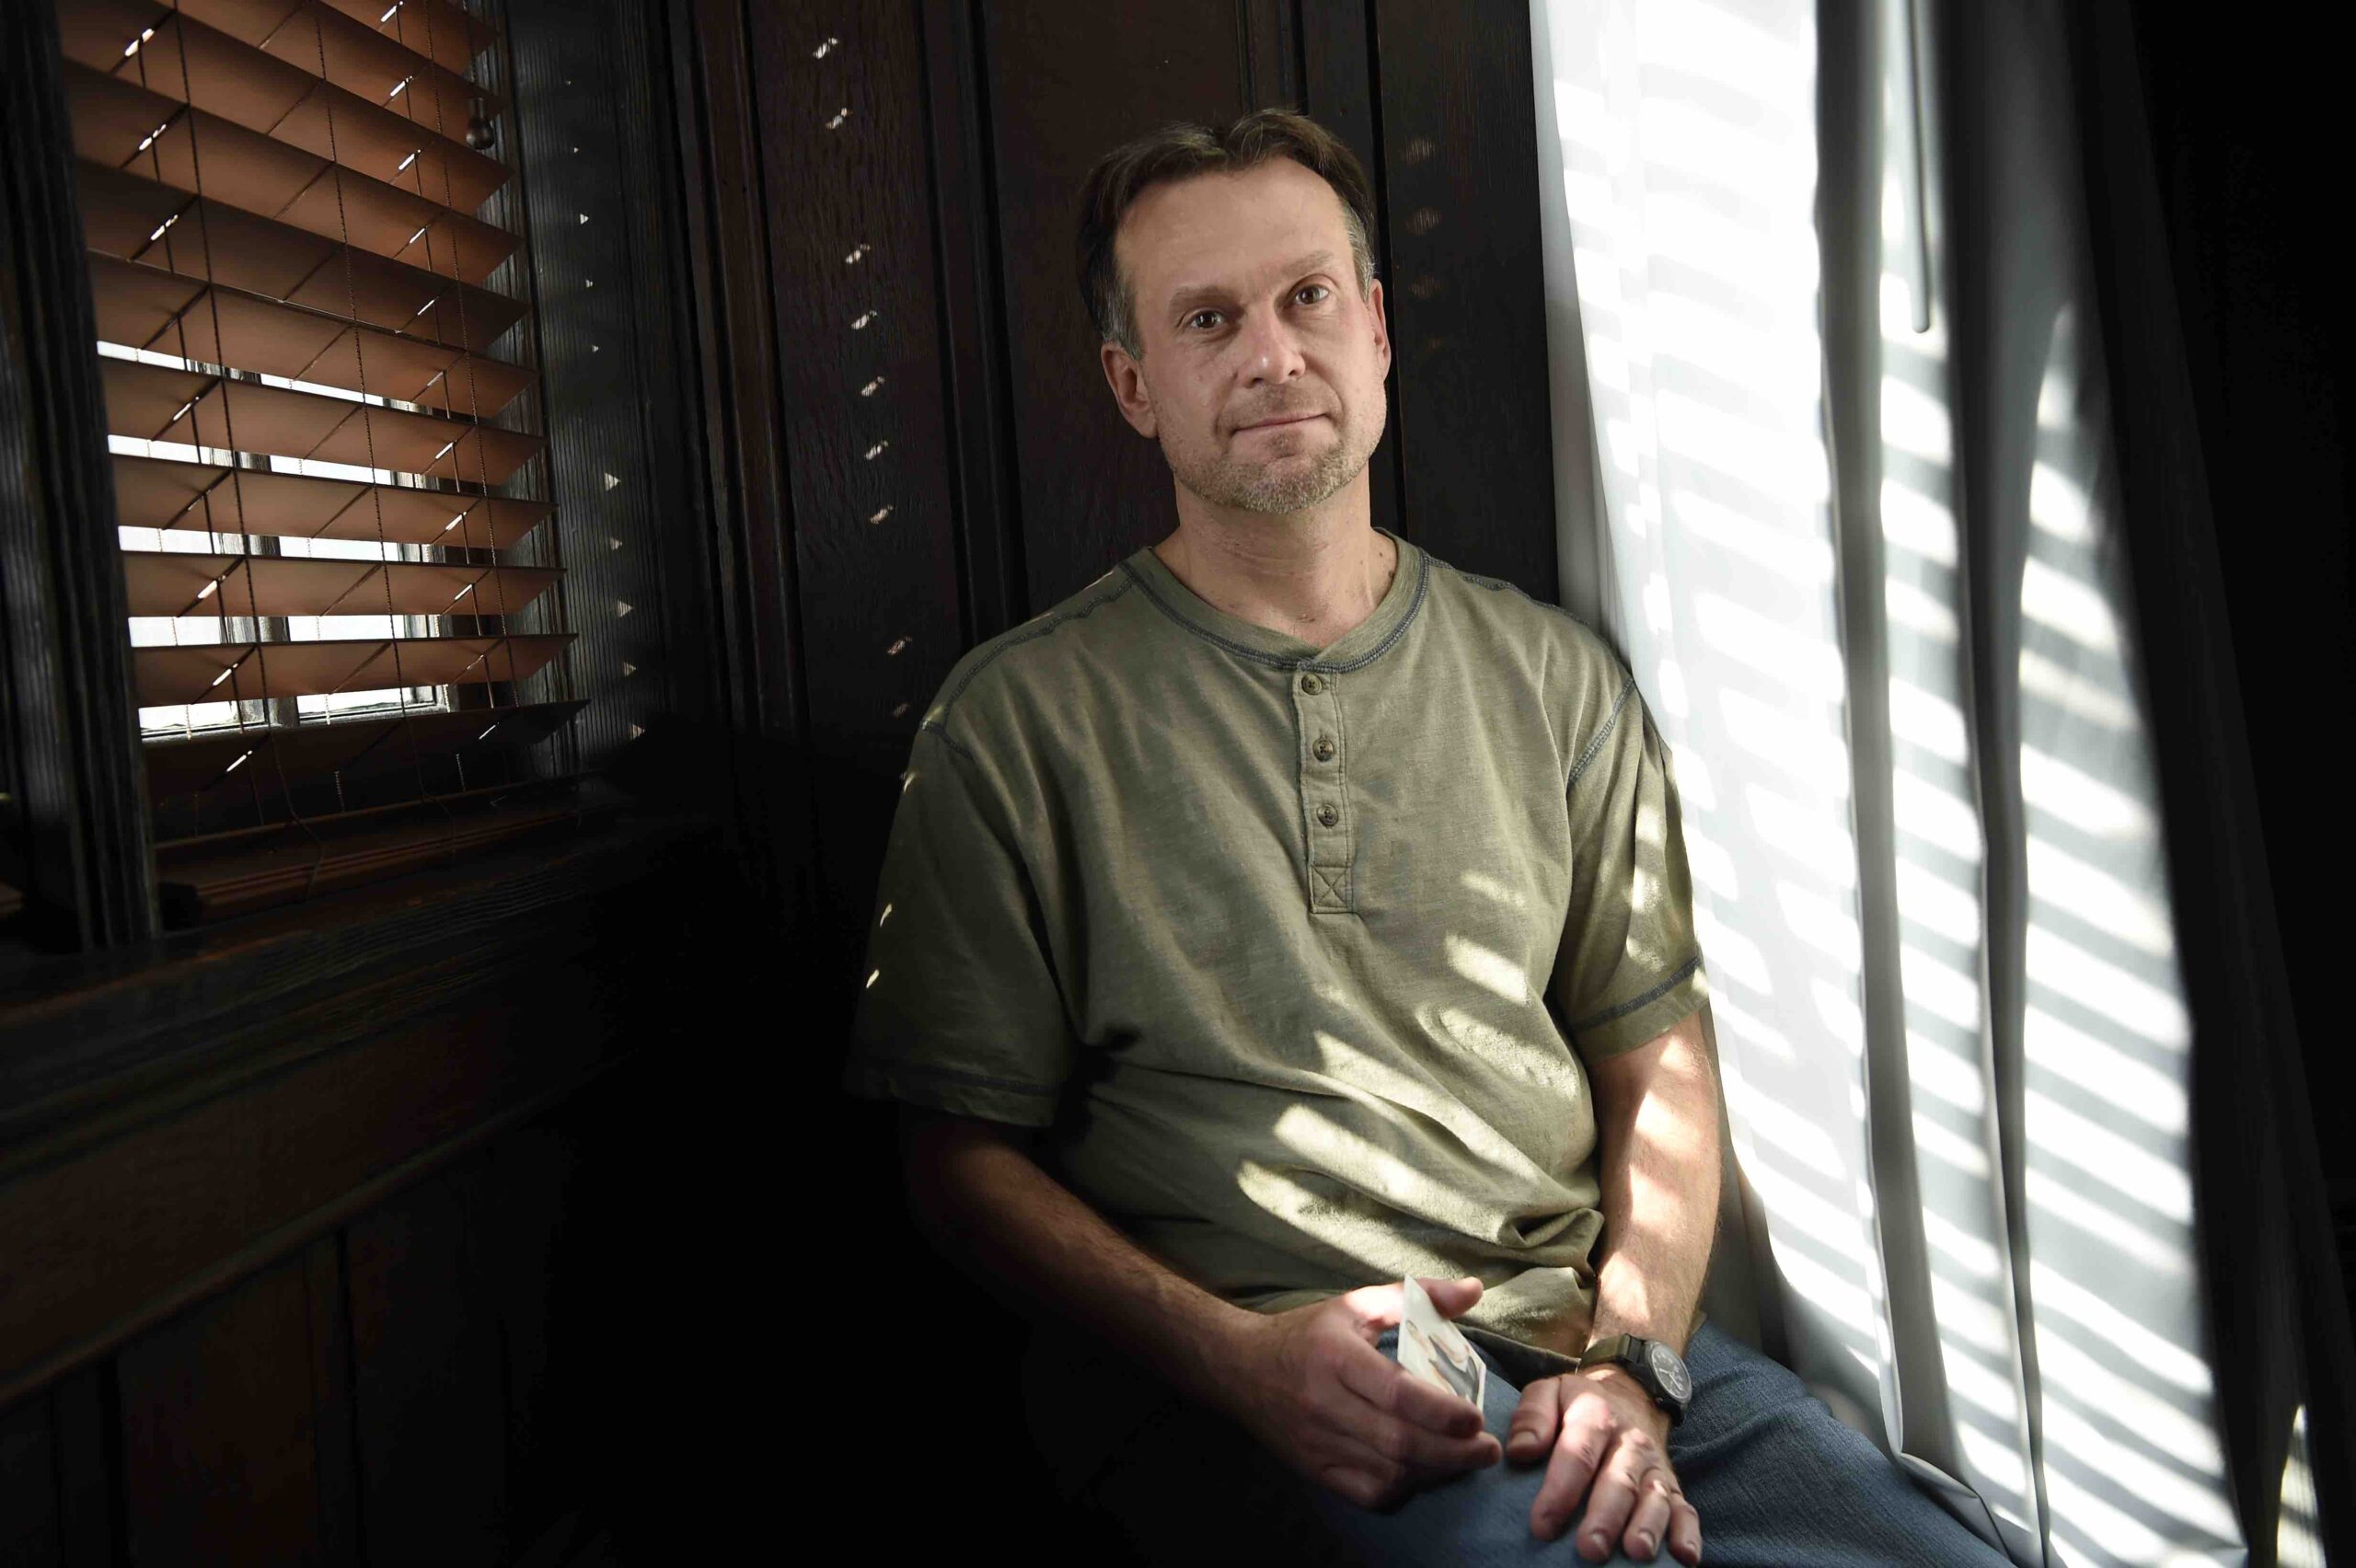 Exoneree Keith Hardin on Freedom, the New Year and Taking Each Day as It Comes